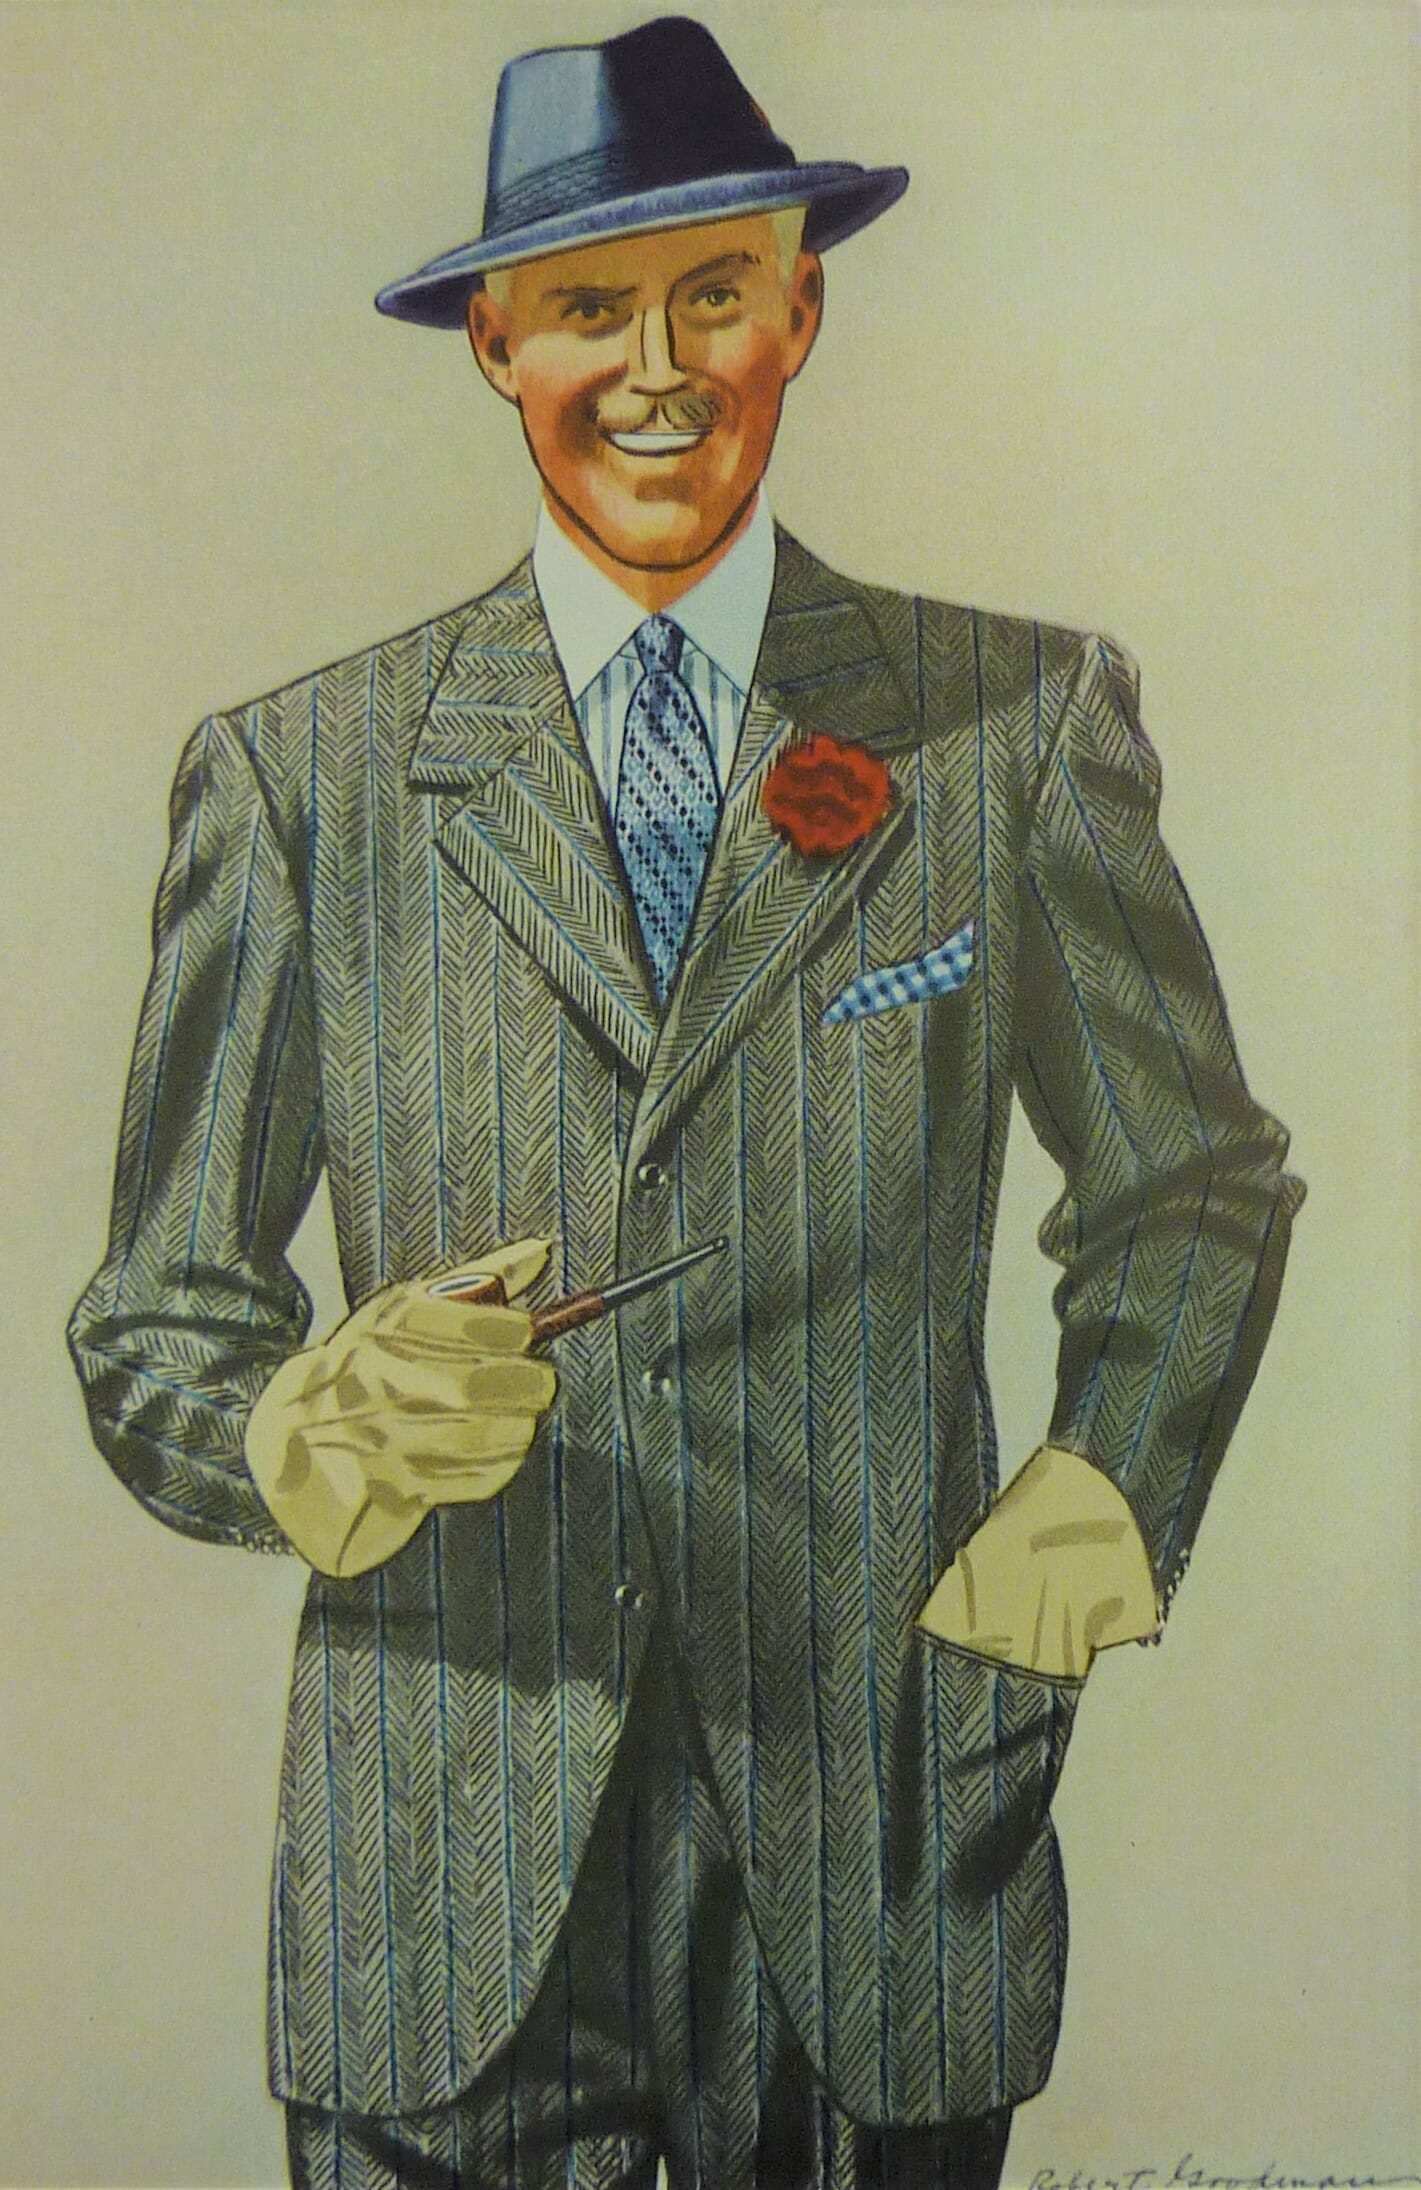 Esquire May 1938 - Multiple Paired Stripes